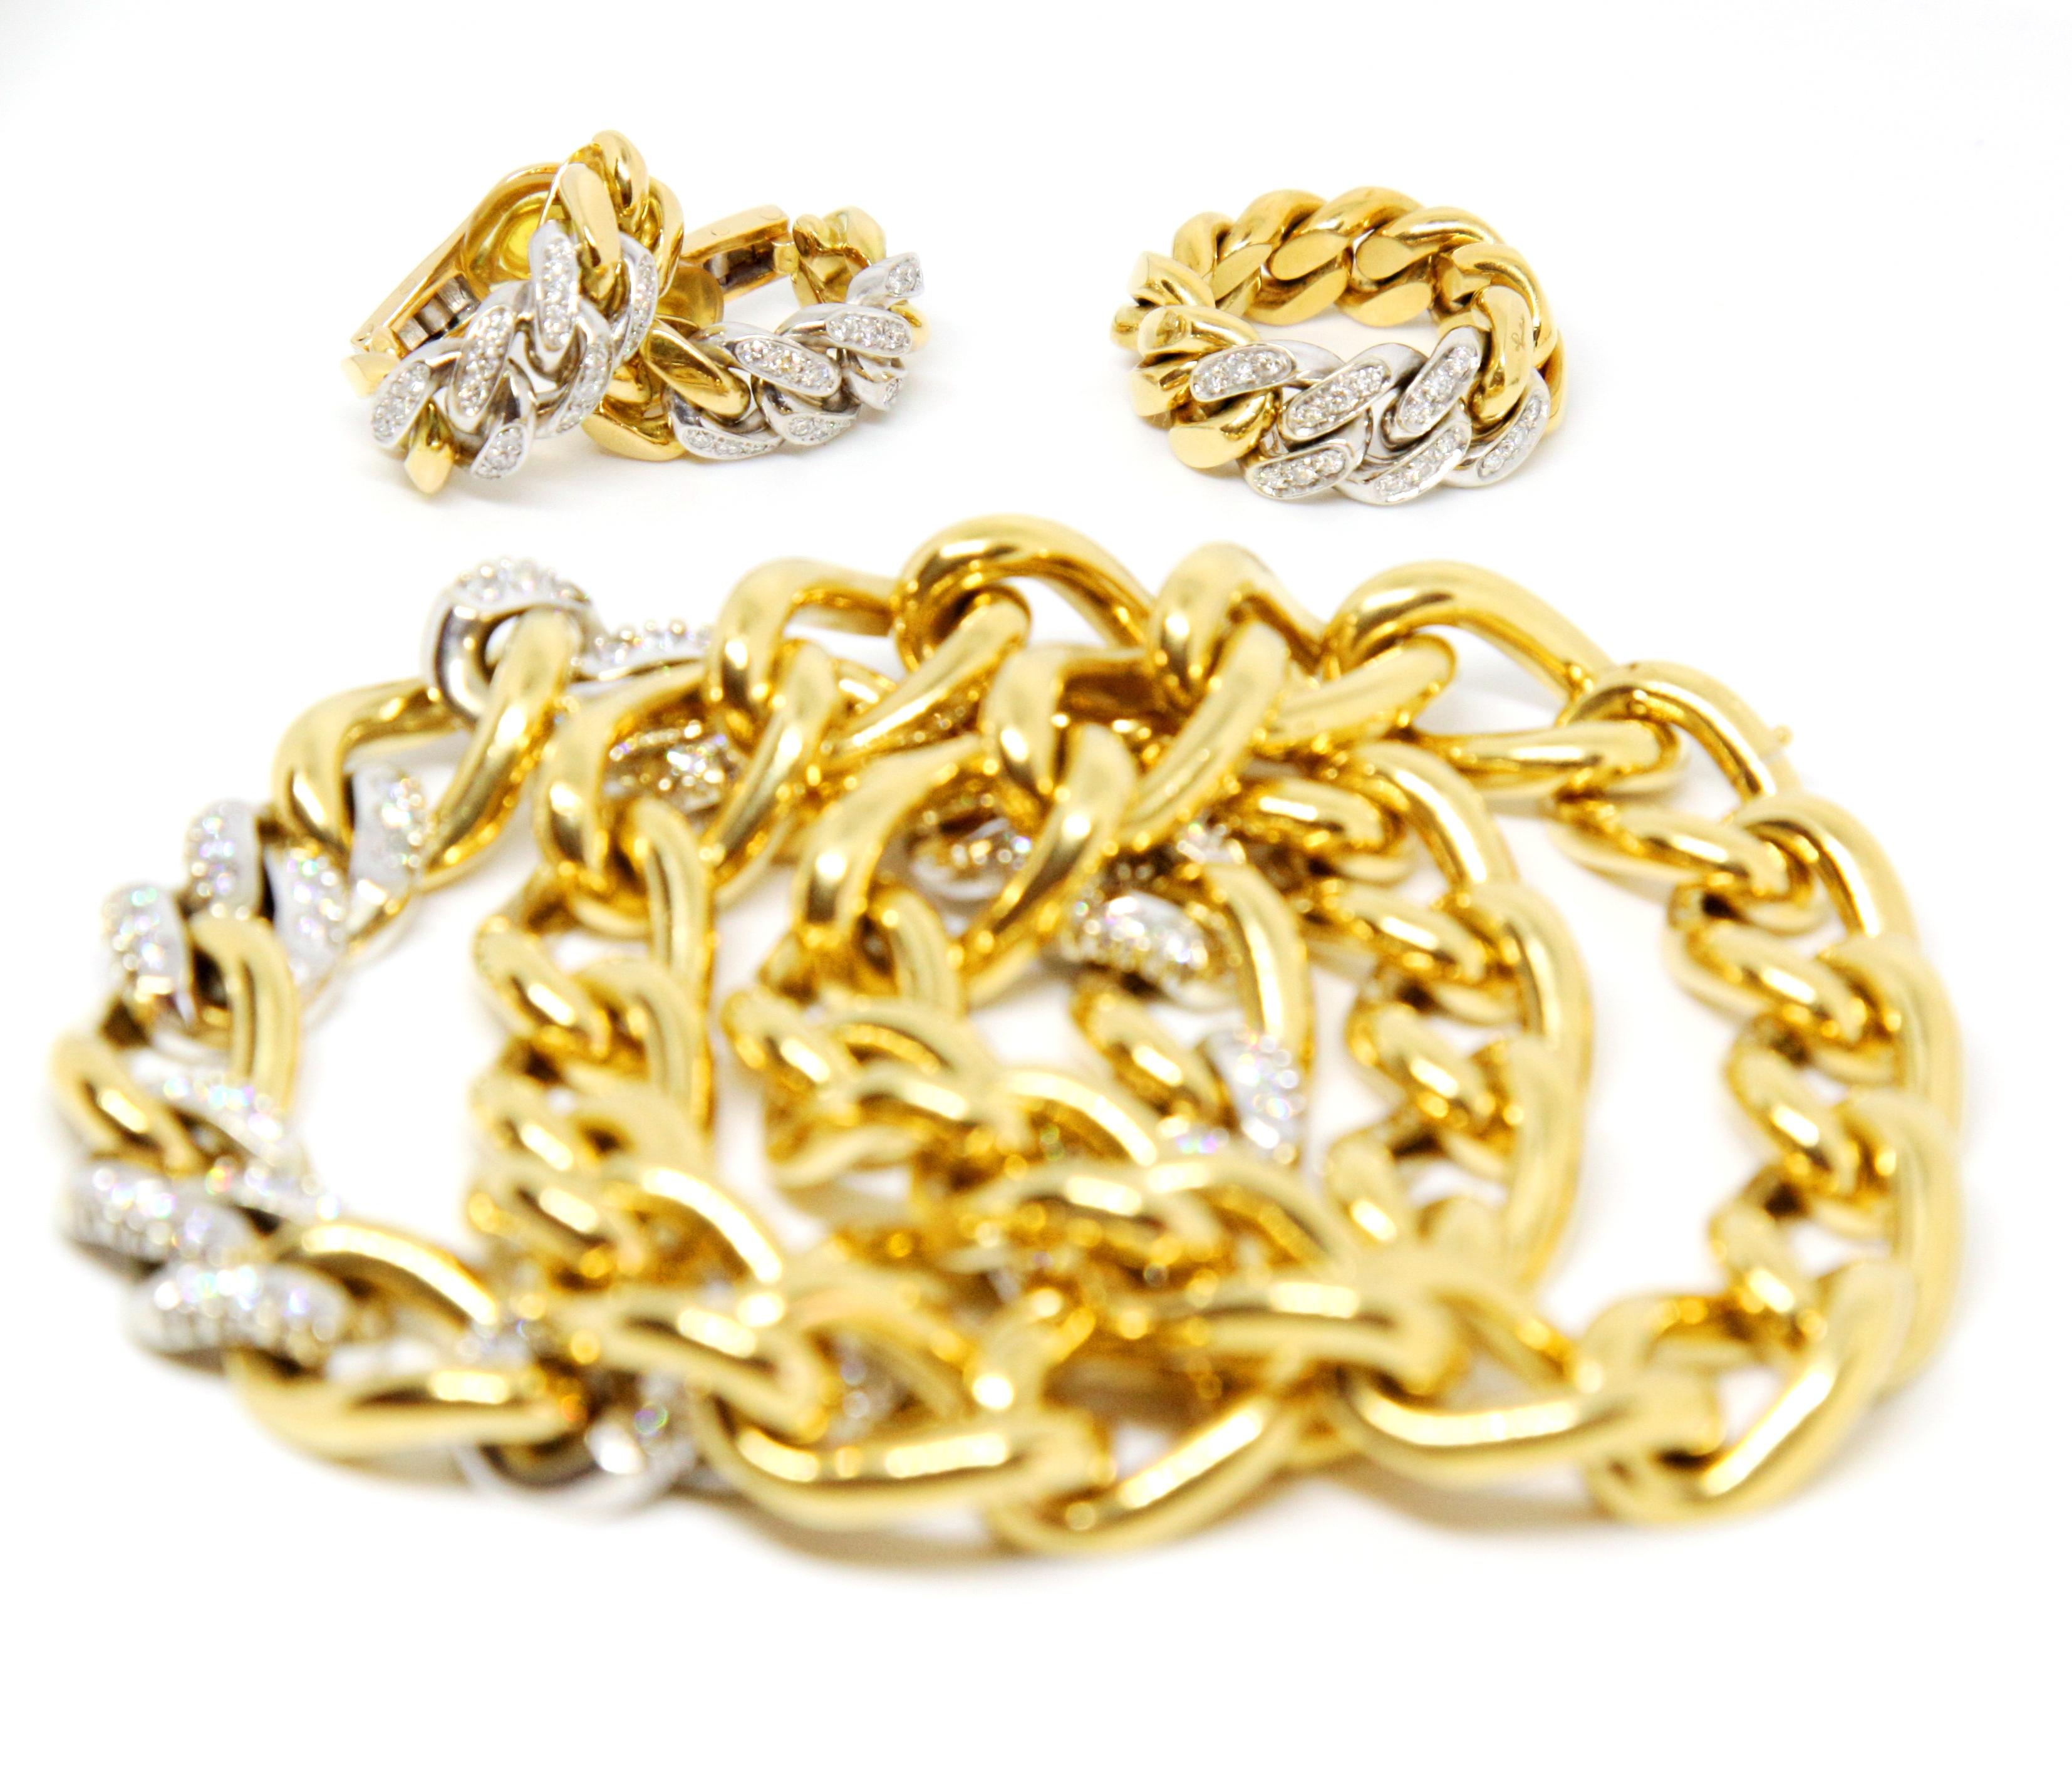 Iconic Pomellato Diamond & Gold Chain Bracelet Necklace Earrings Ring Set Suite In Good Condition For Sale In Switzerland, CH